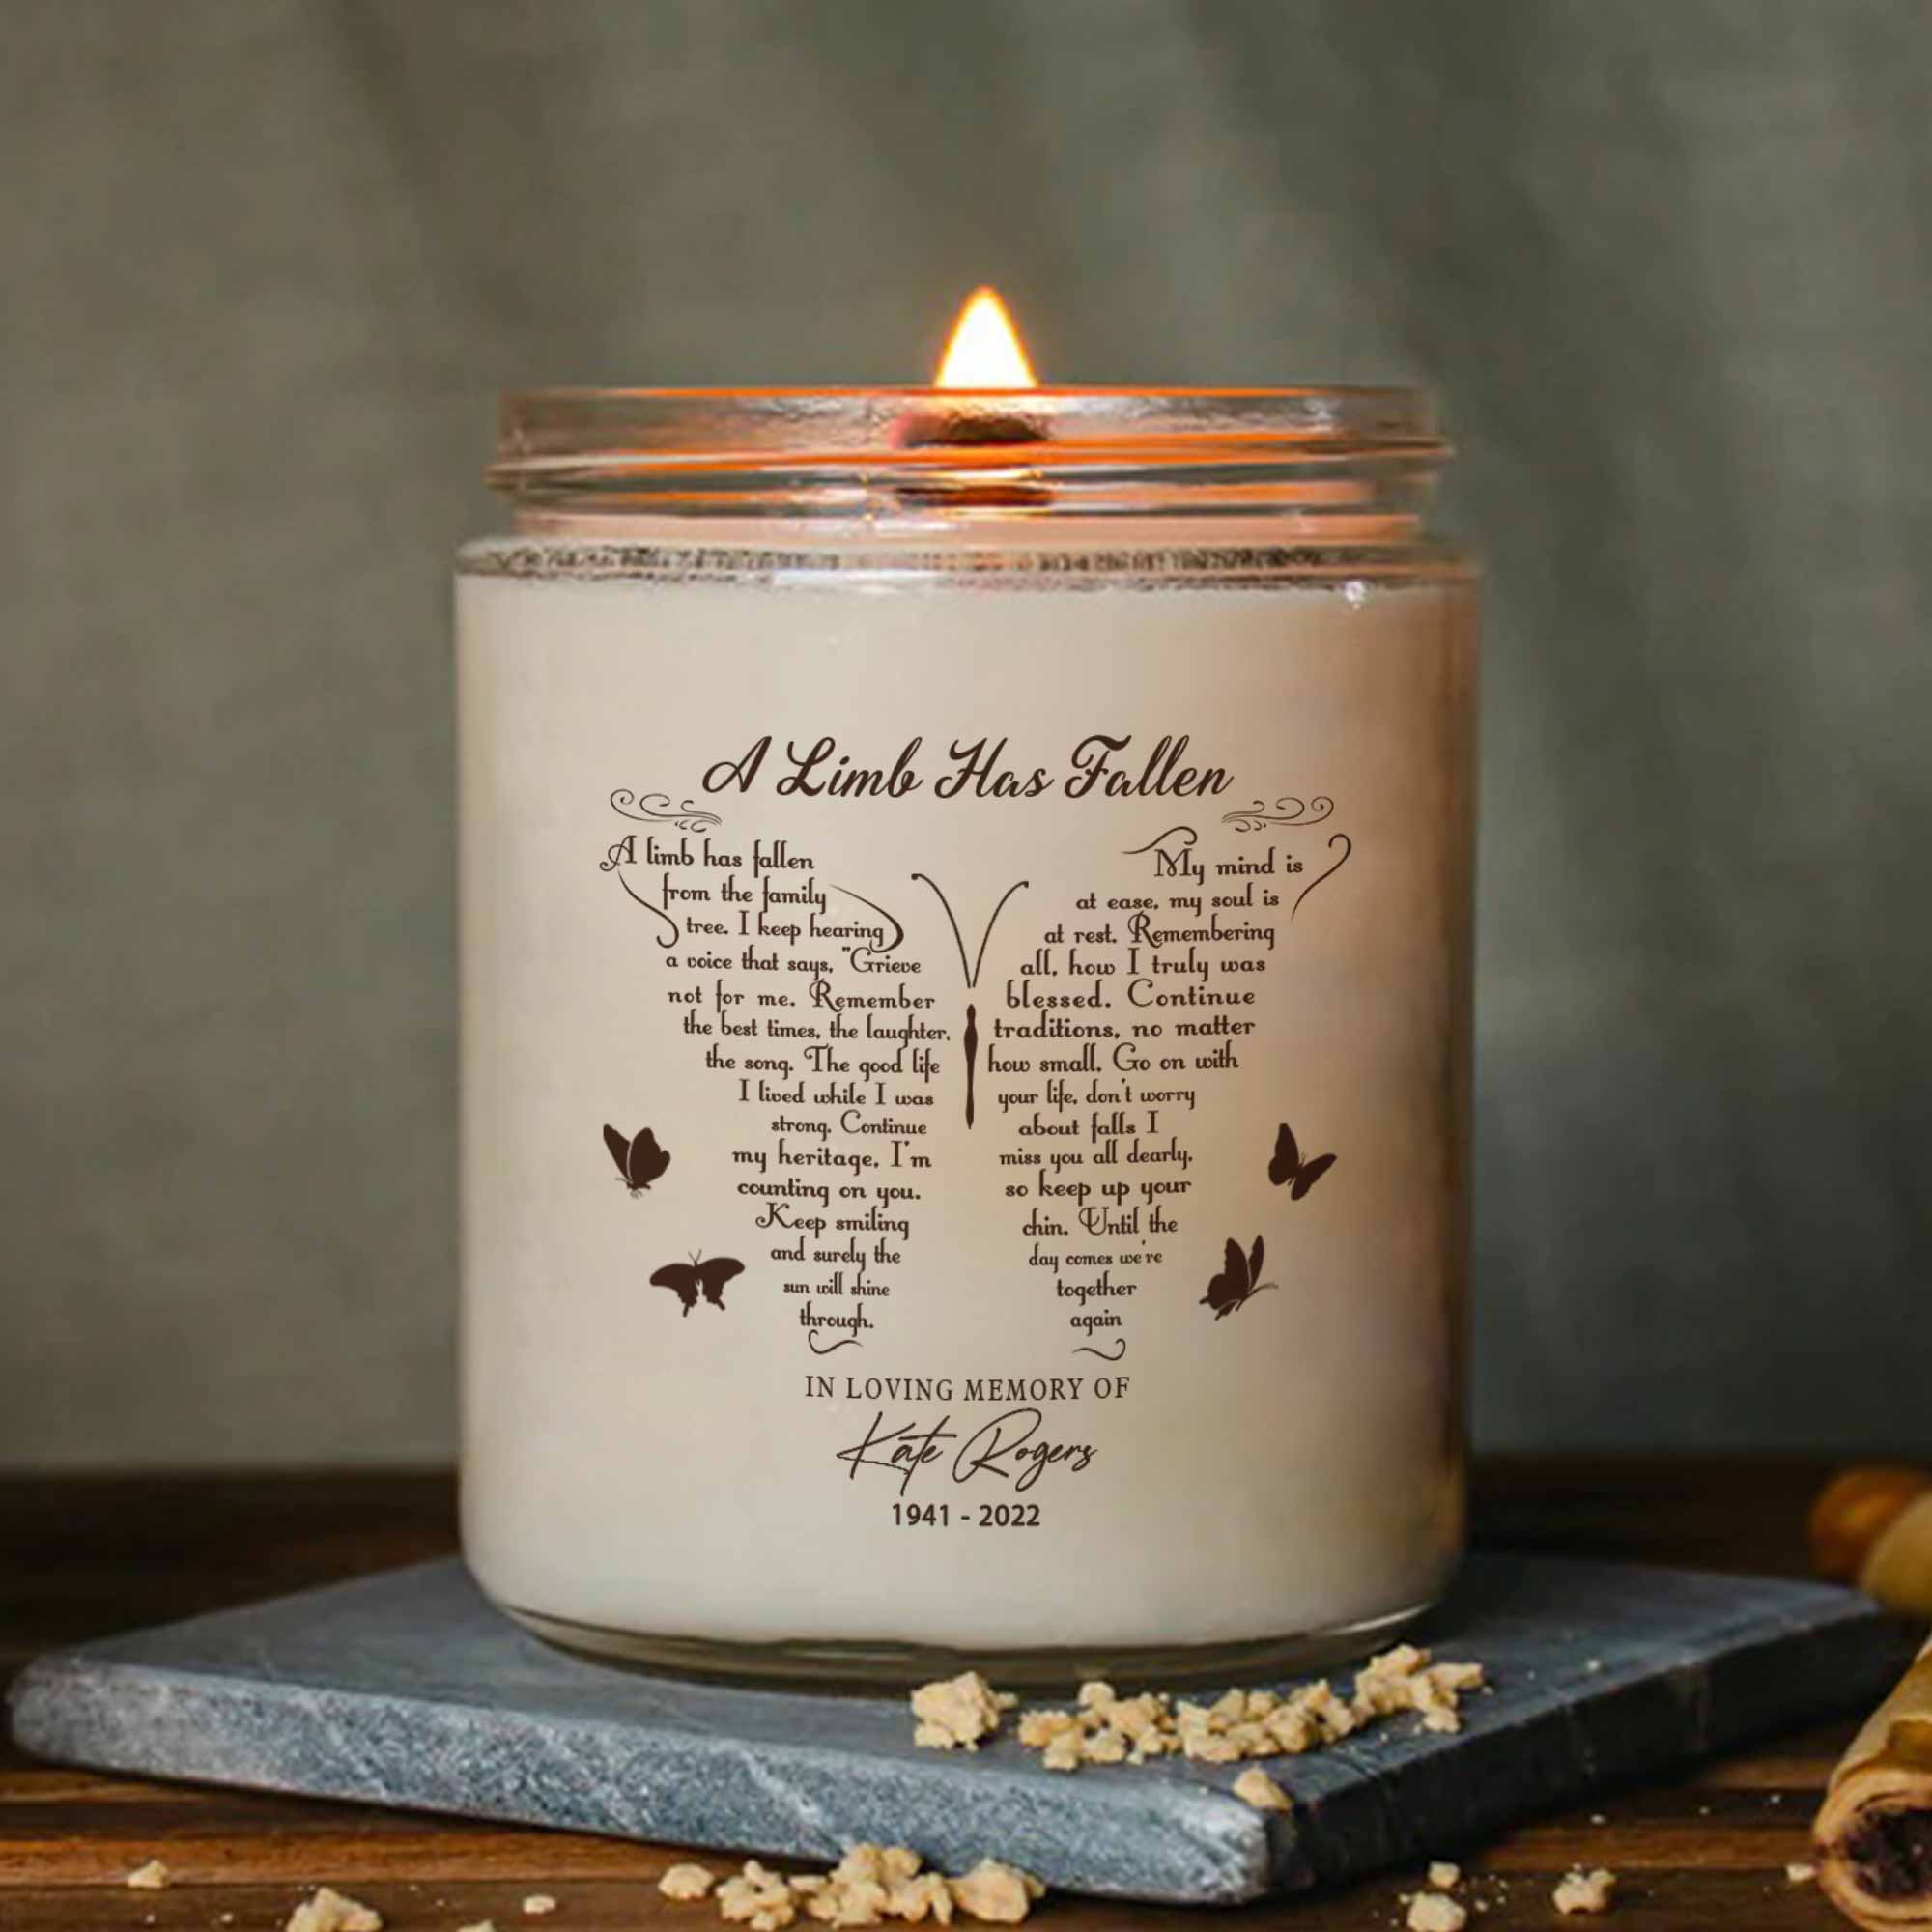 Personalized Candle Gifts, A Limb Has Fallen In Loving Memory Candle, Sympathy Candle Gifts